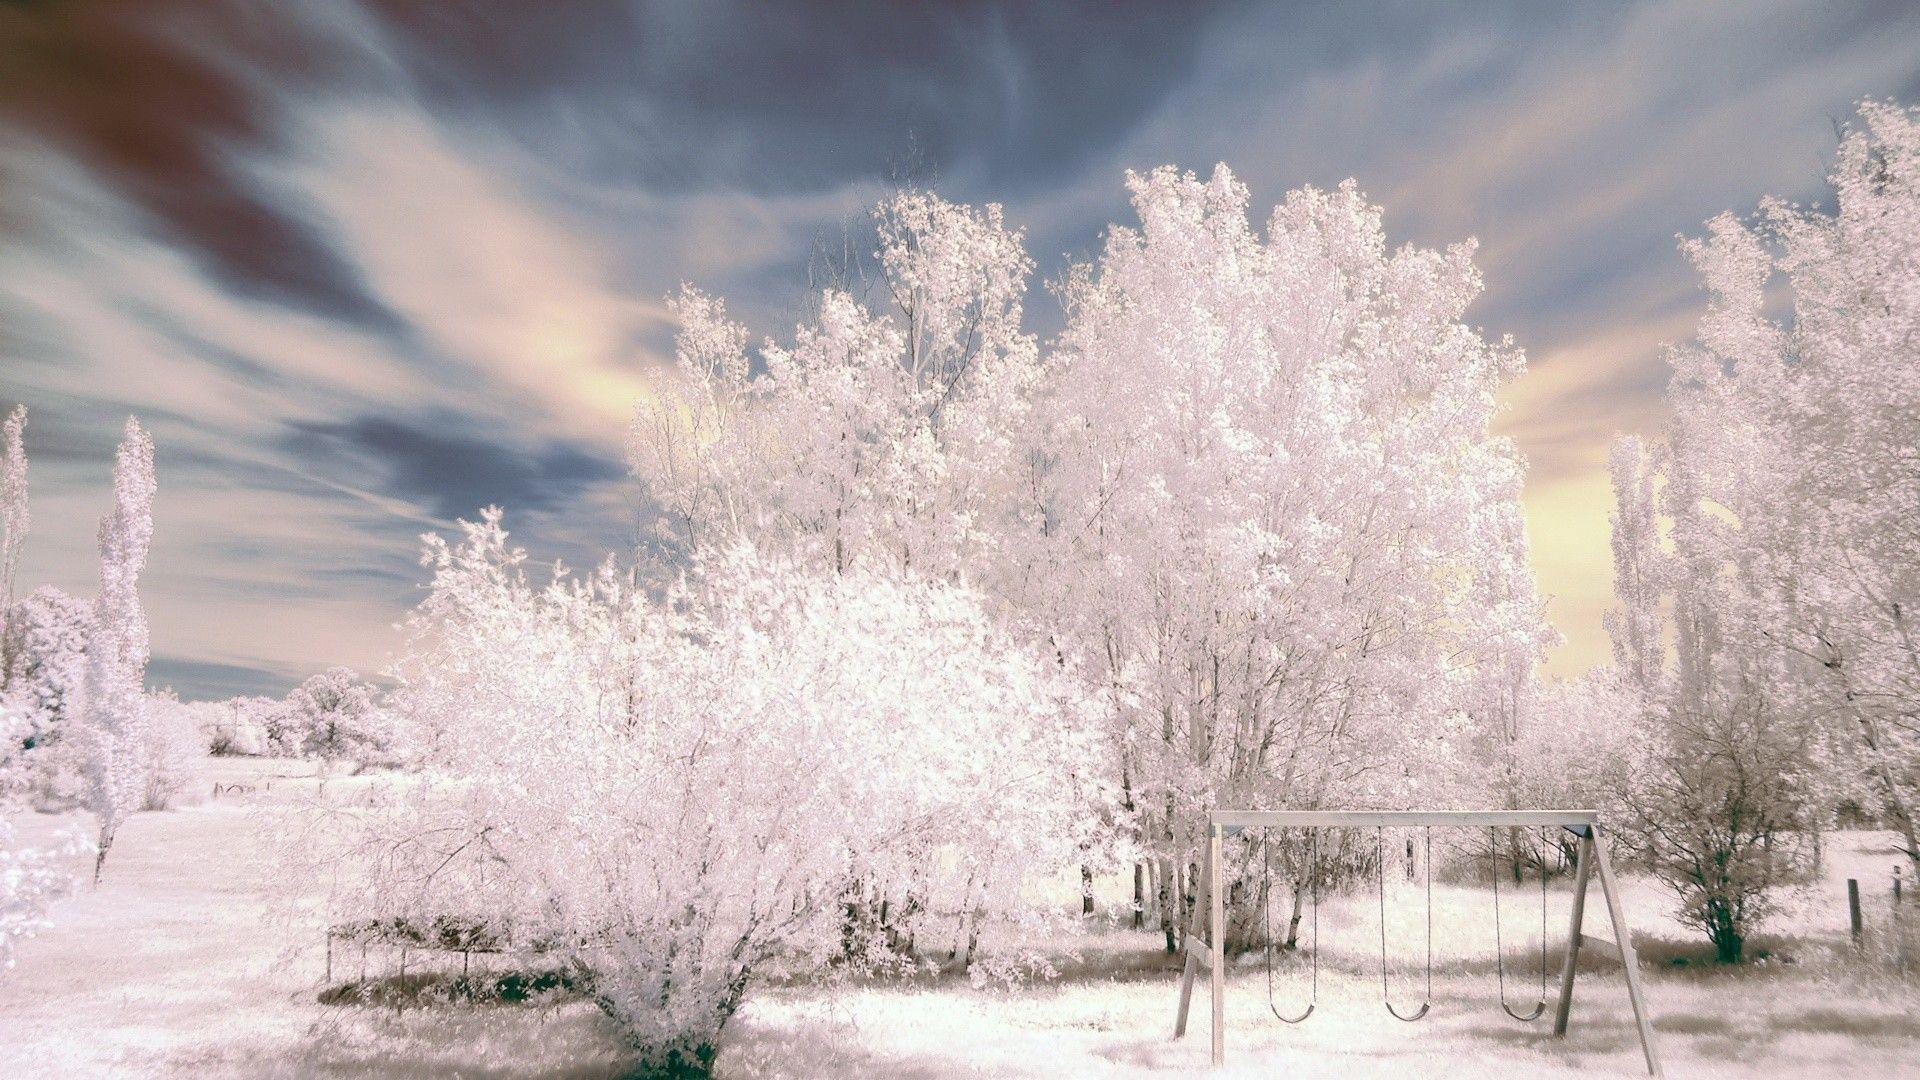 landscapes nature winter (season) trees HDR photography